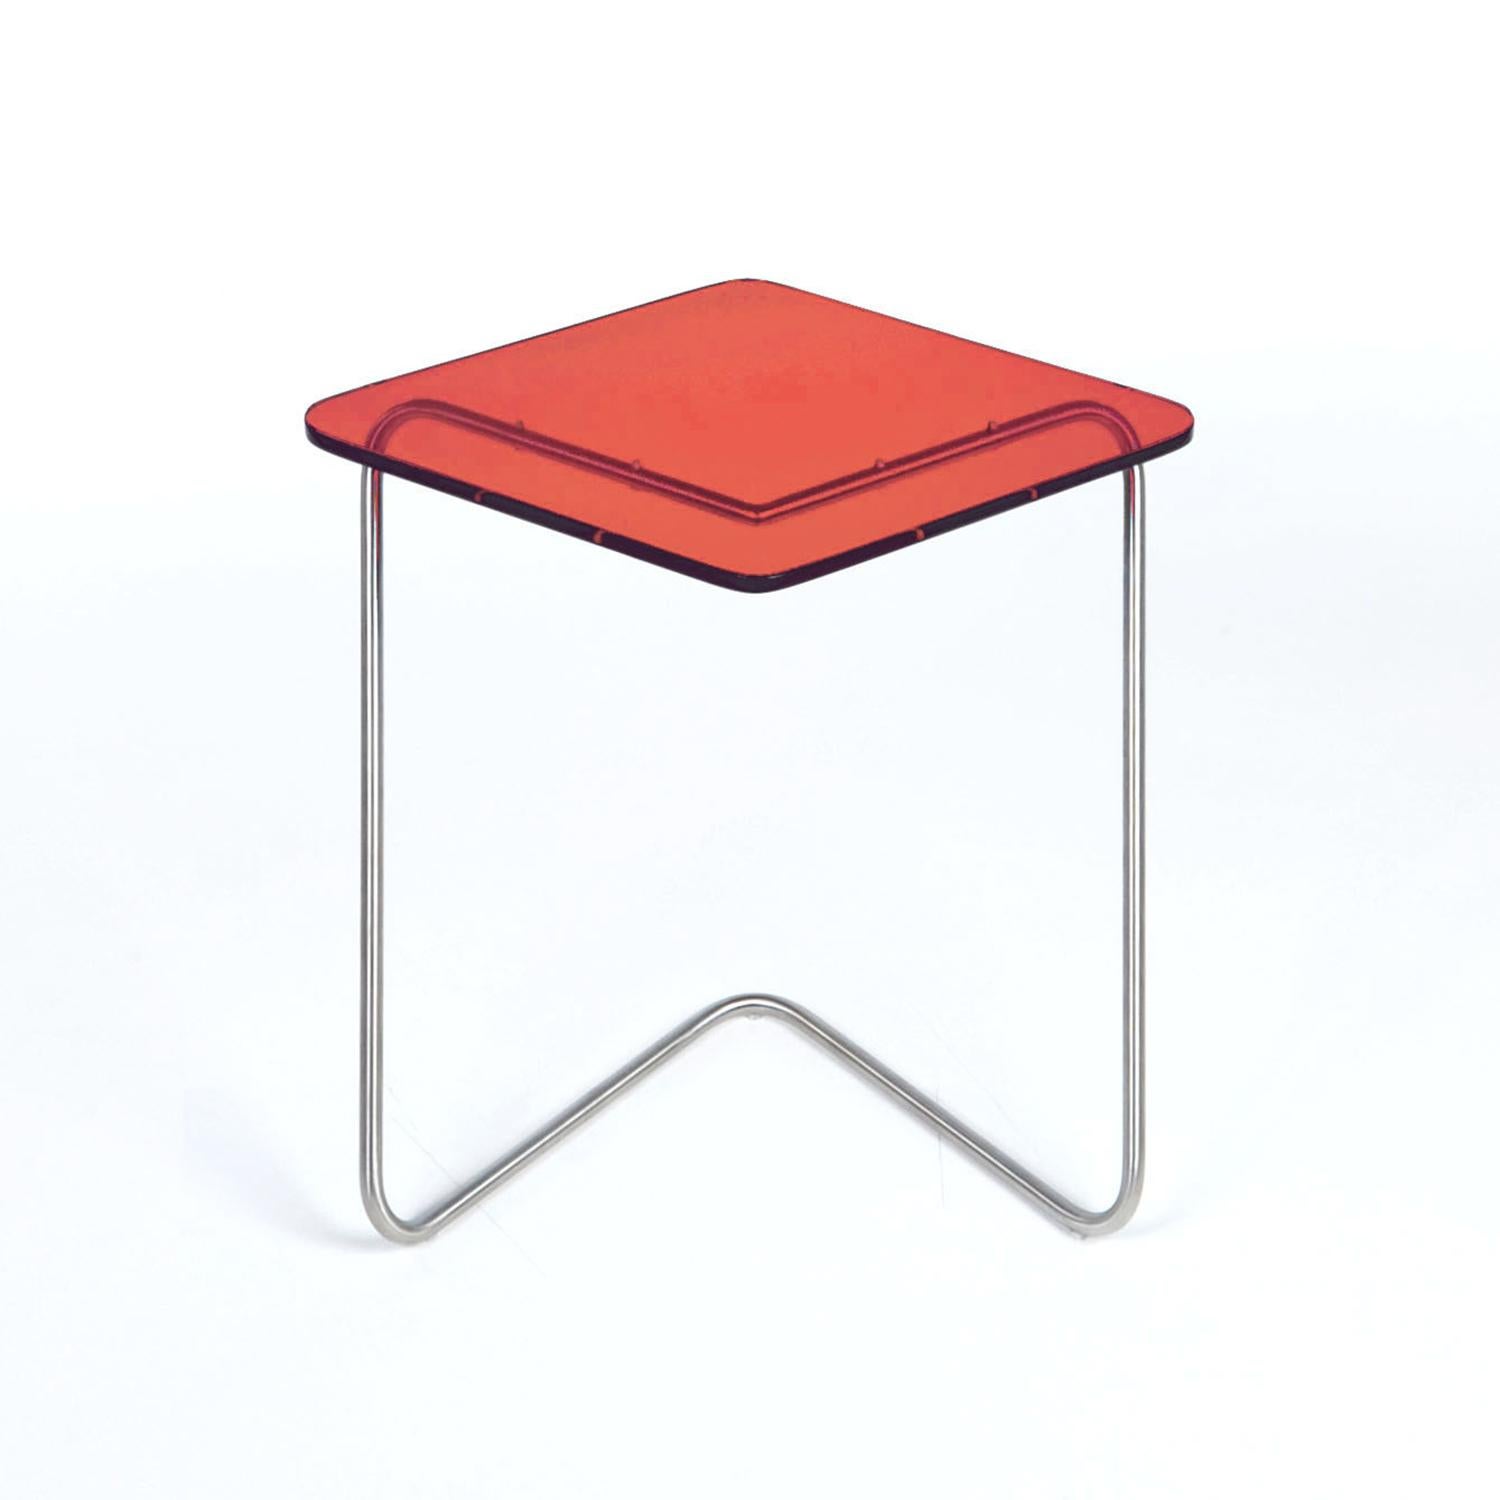 The Diamond side table by Rita Kettaneh 
Dimensions: The base: brushed stainless steel 
 optionally plated with copper or brass
 The top: acrylic
Materials: H 42 x W 45 x D 34.5 cm
Weight: 2.65 Kg

Colors and finishes:
Stainless finish: